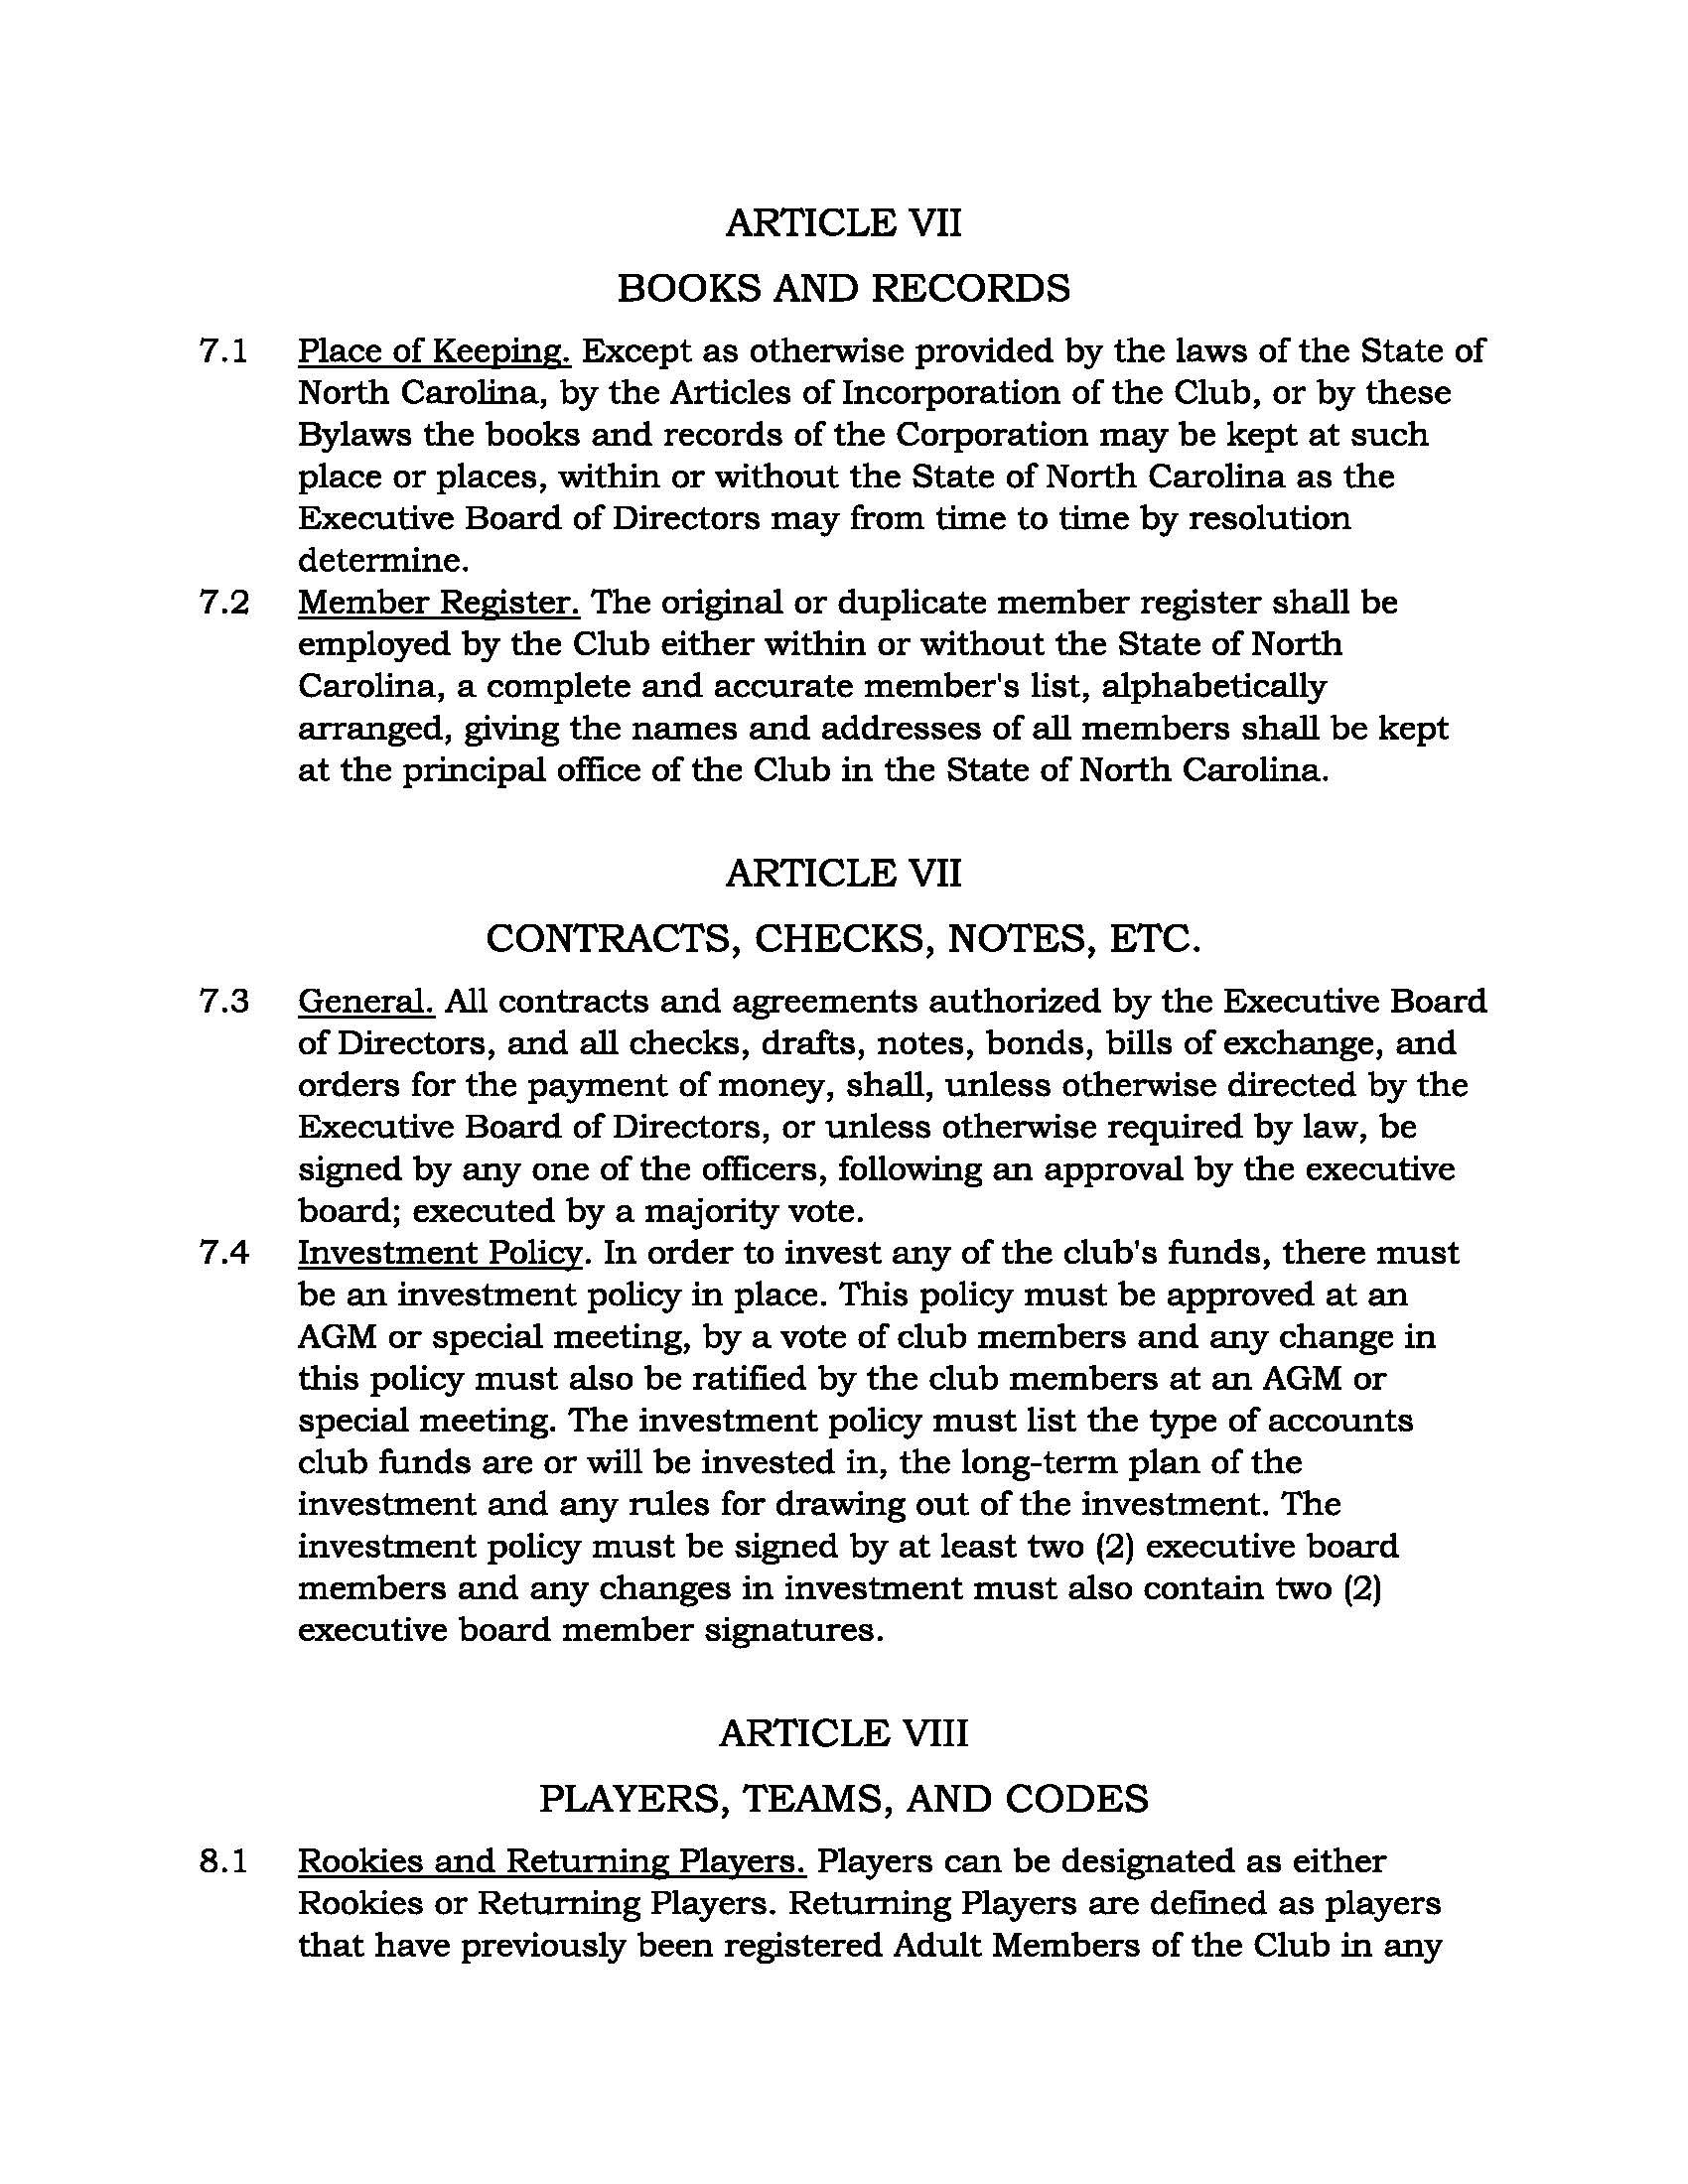 Bylaws of Charlotte James Connolly Gaelic Football Club_11.21.2022 - Signed_Page_12.jpg